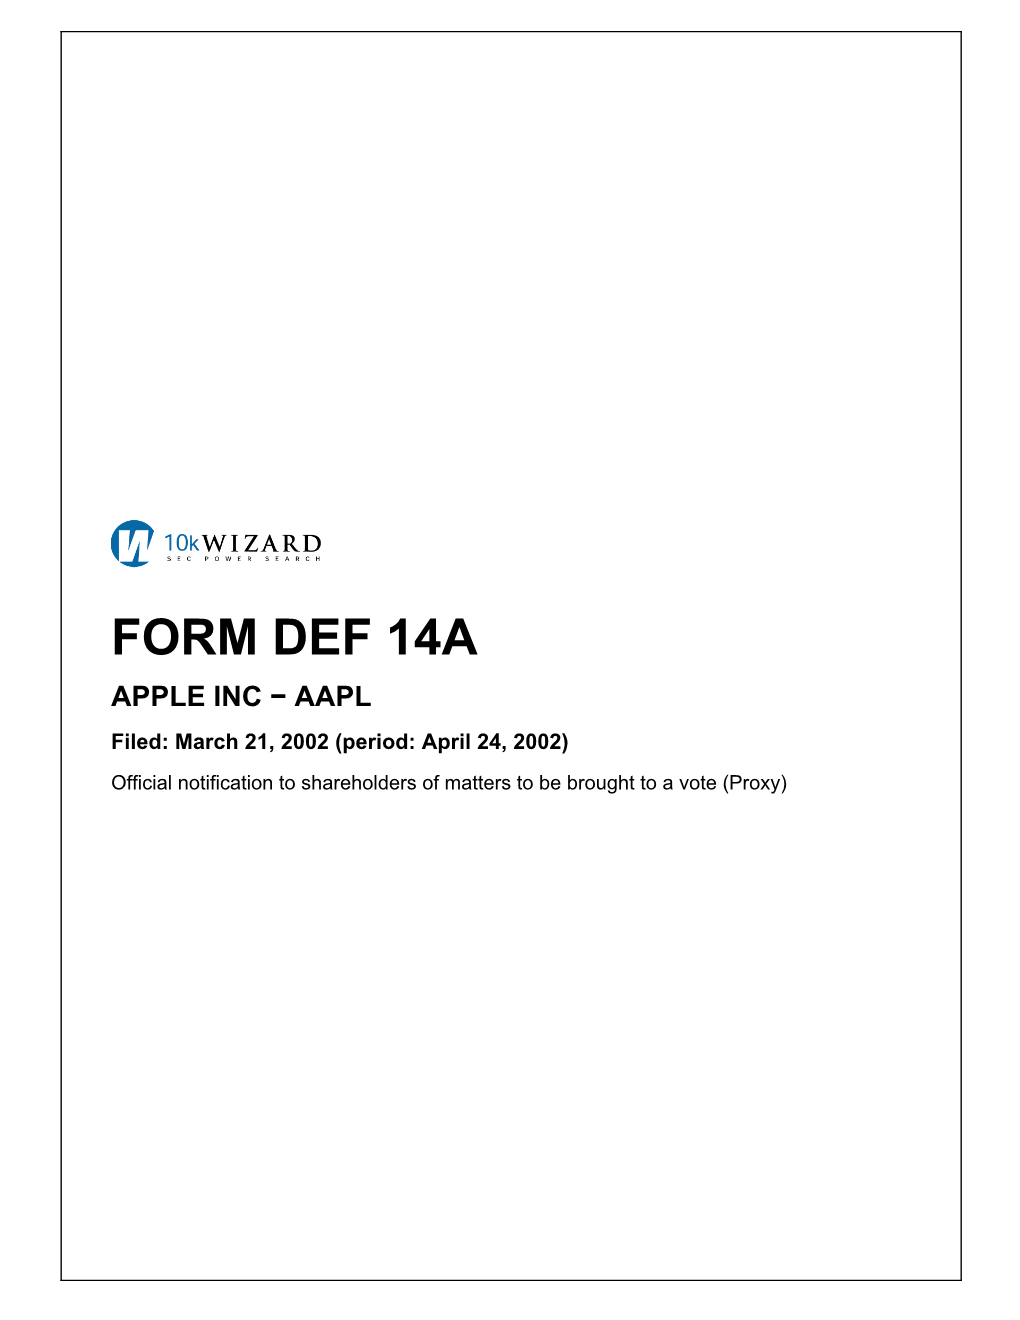 FORM DEF 14A APPLE INC − AAPL Filed: March 21, 2002 (Period: April 24, 2002)